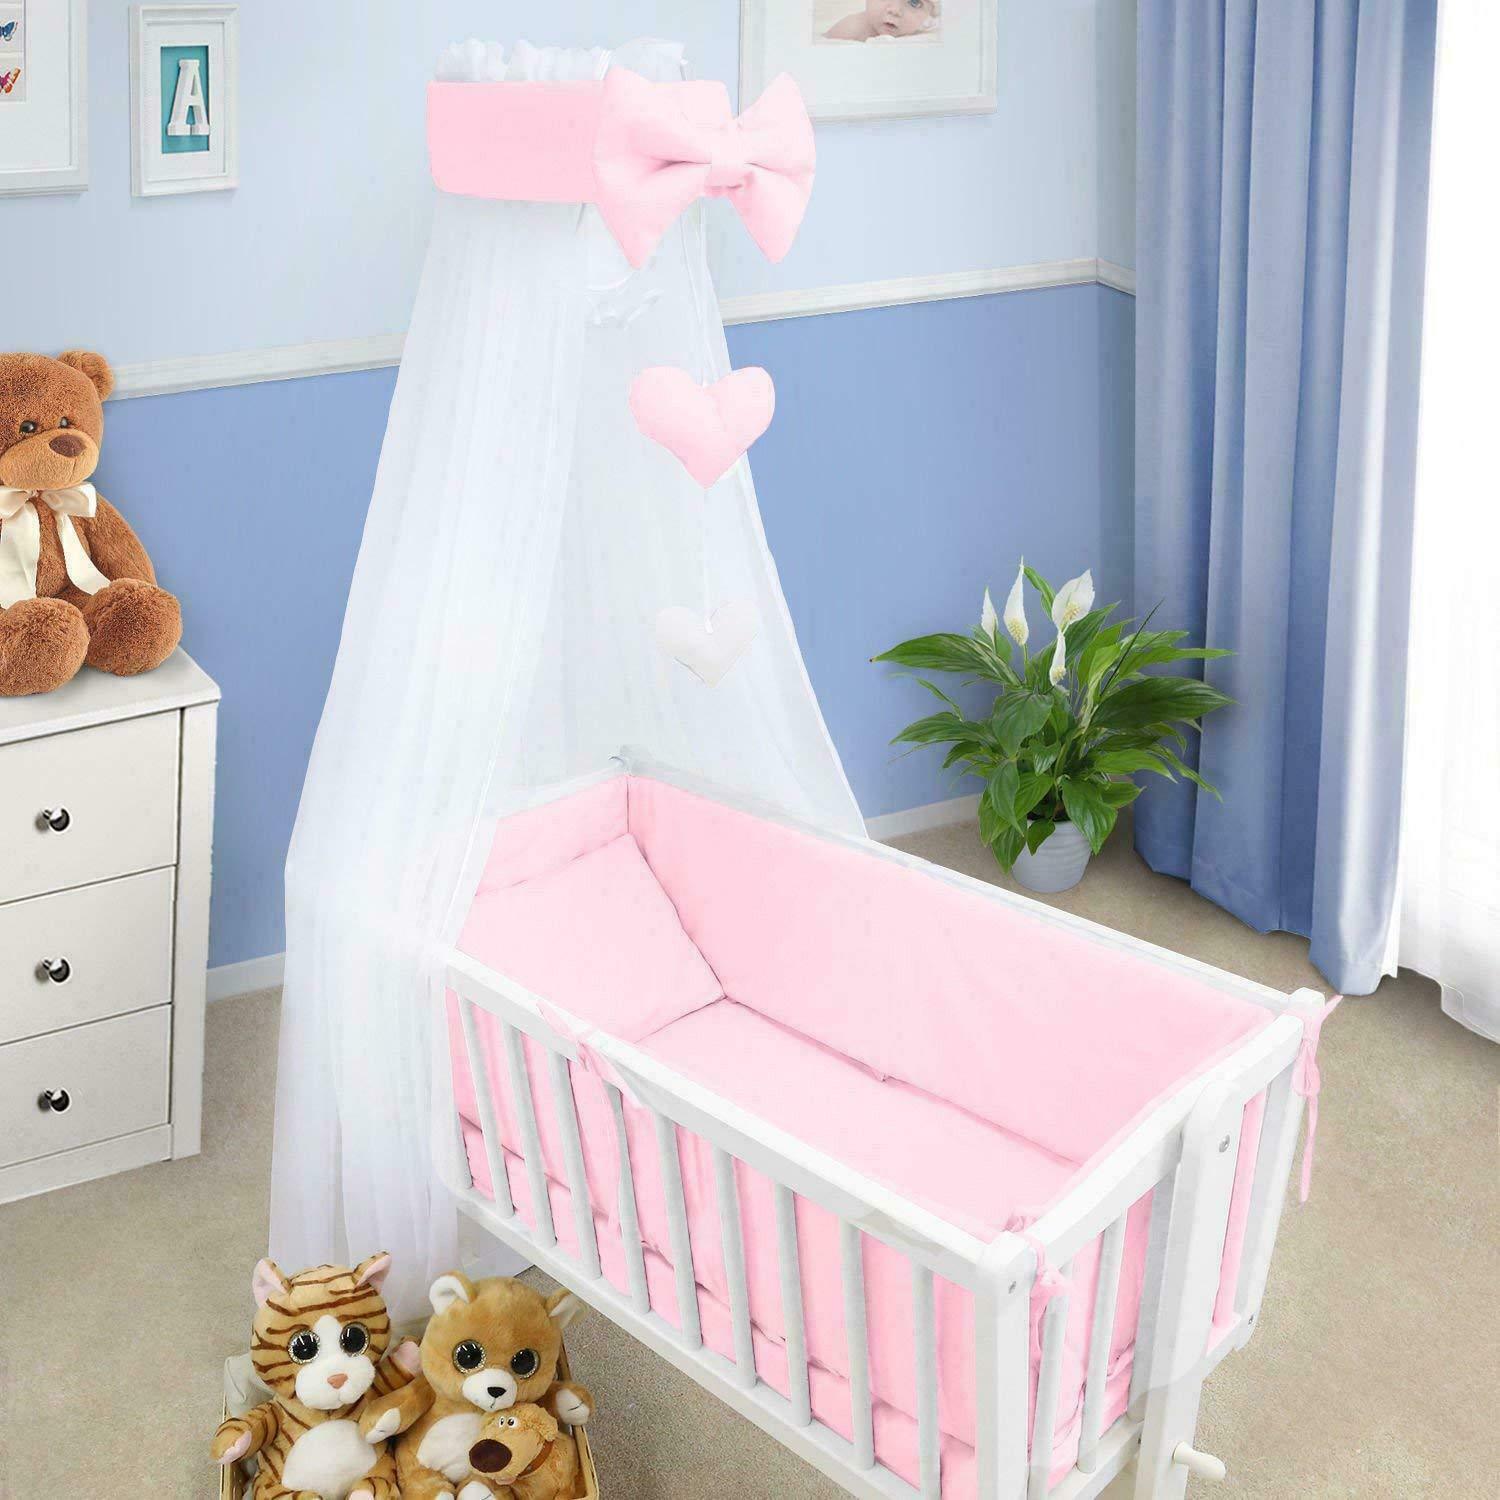 Baby Cot Bedding Set - 10 Piece Including Cot Bumper, Pillow, Duvet and Canopy to Fit 90x40cm Crib Pink - 100% Cotton